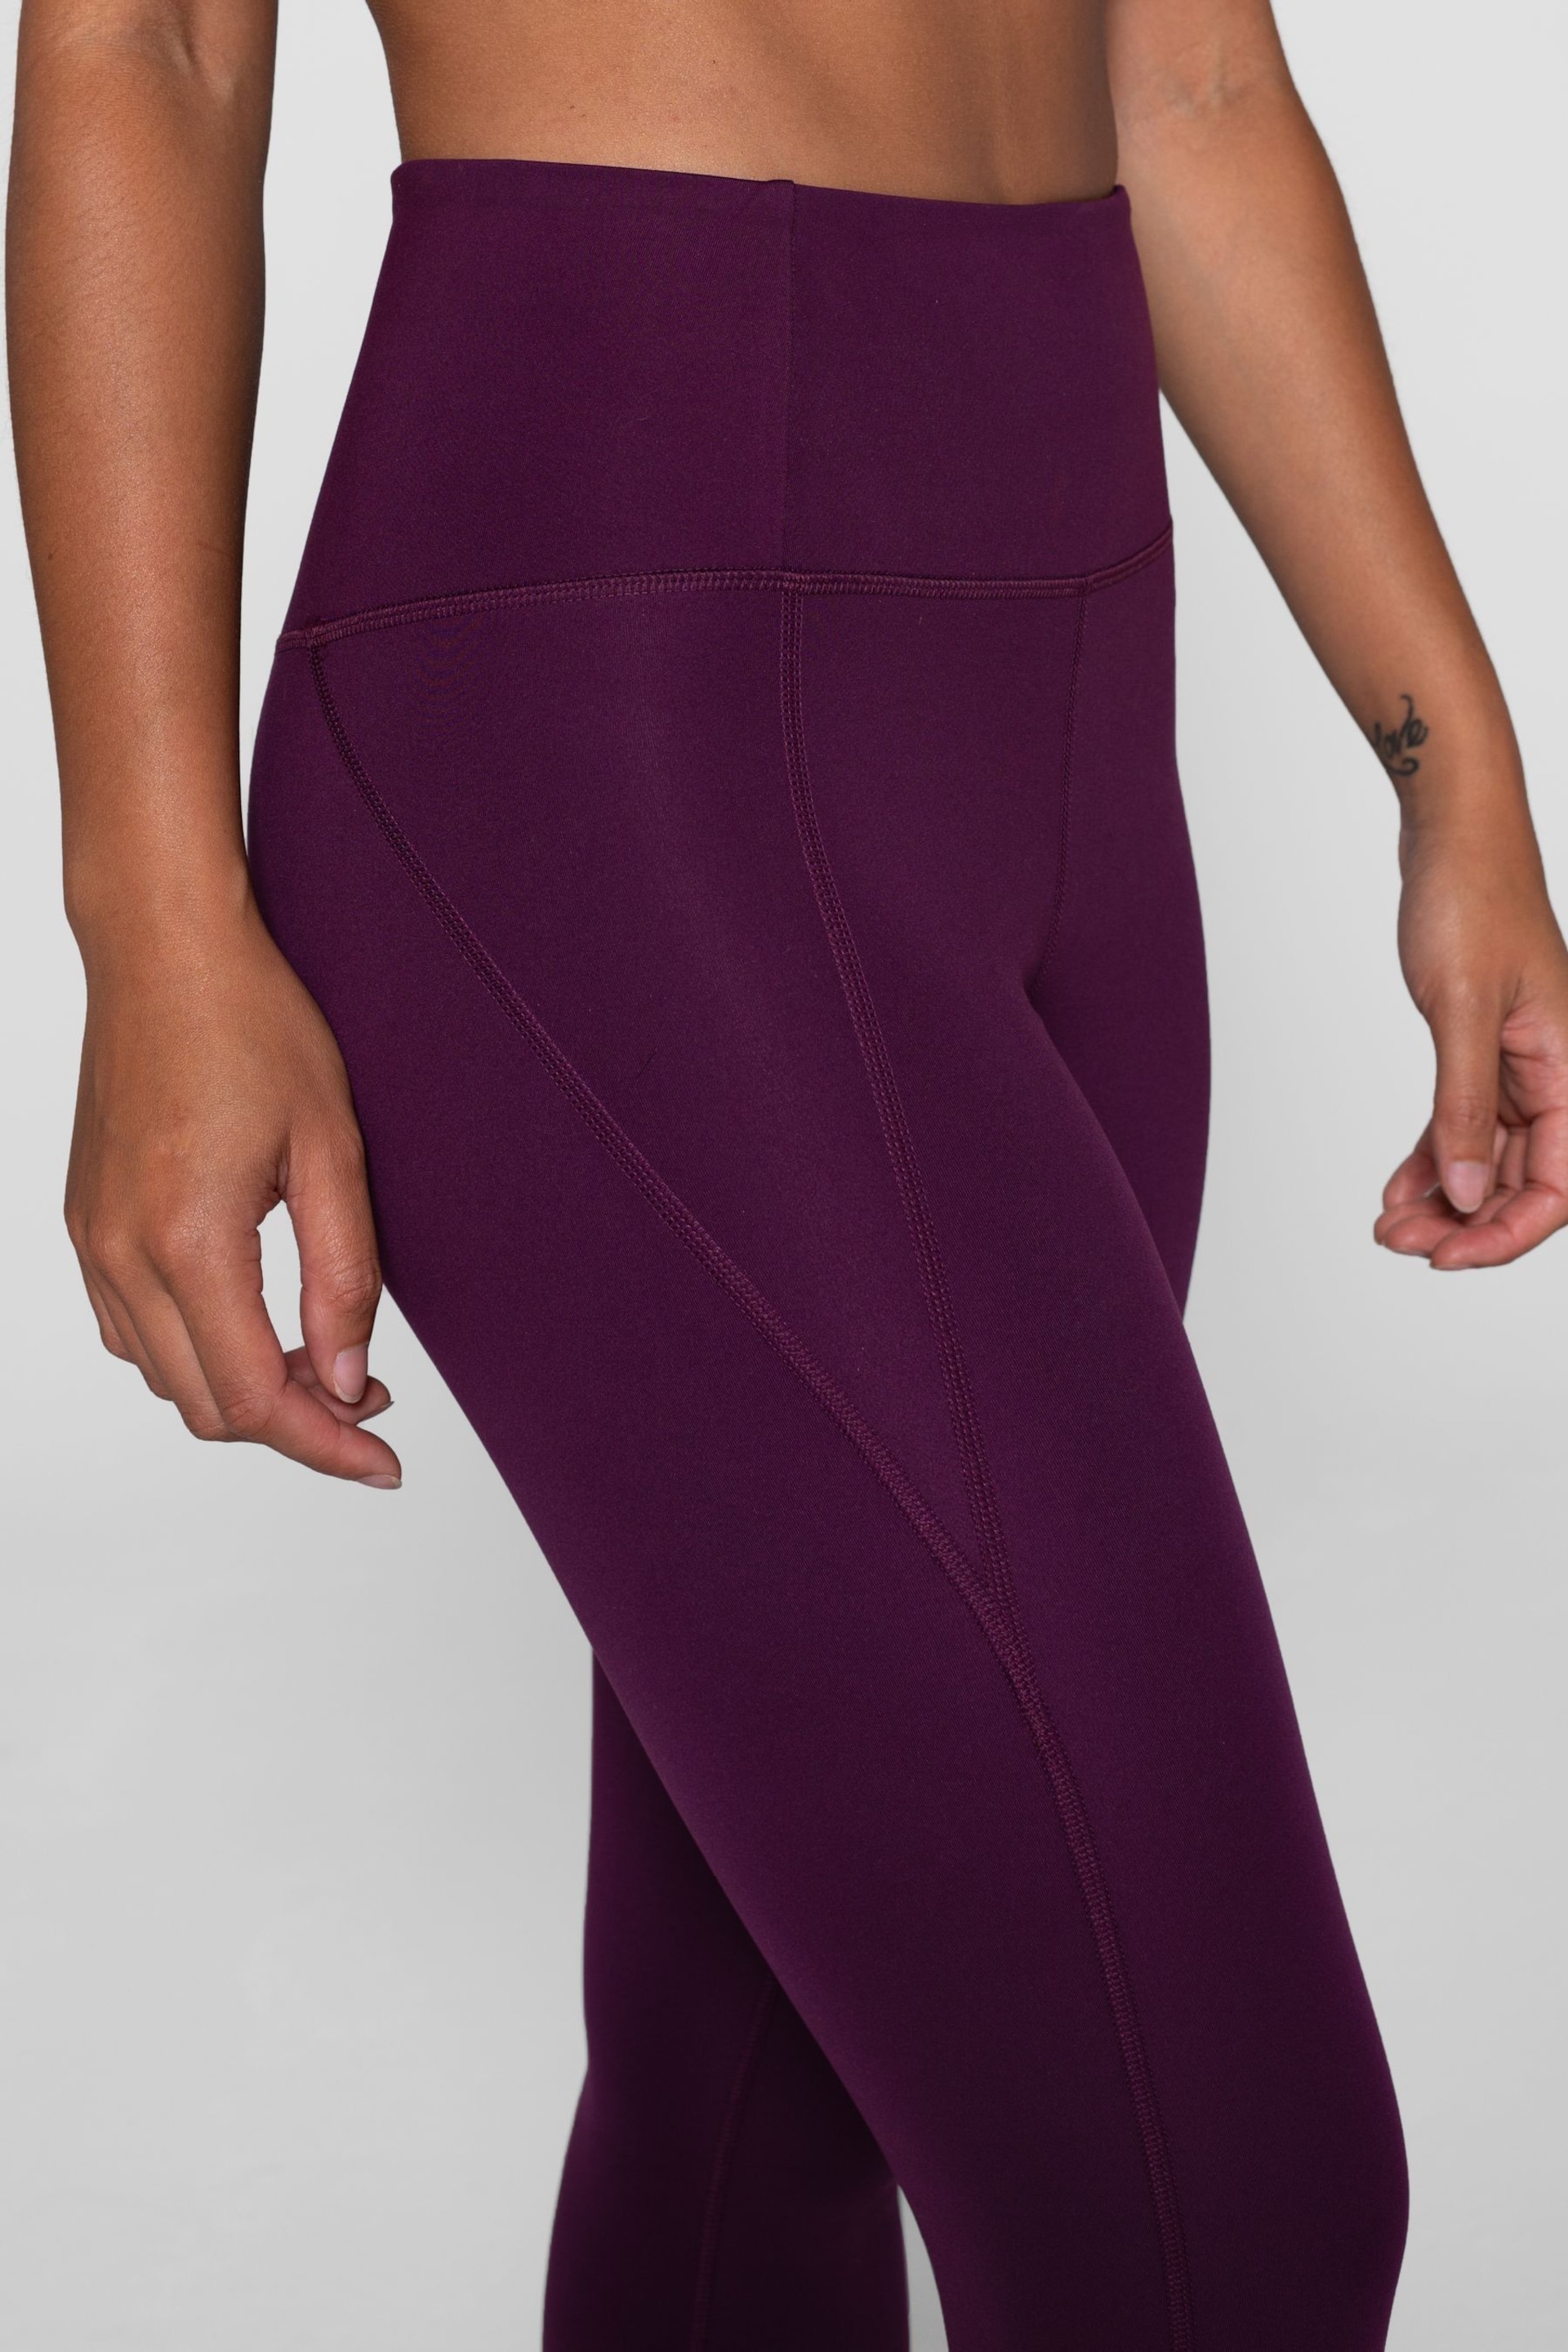 Girlfriend Collective High Rise Compressive Leggings - Image 10 of 16